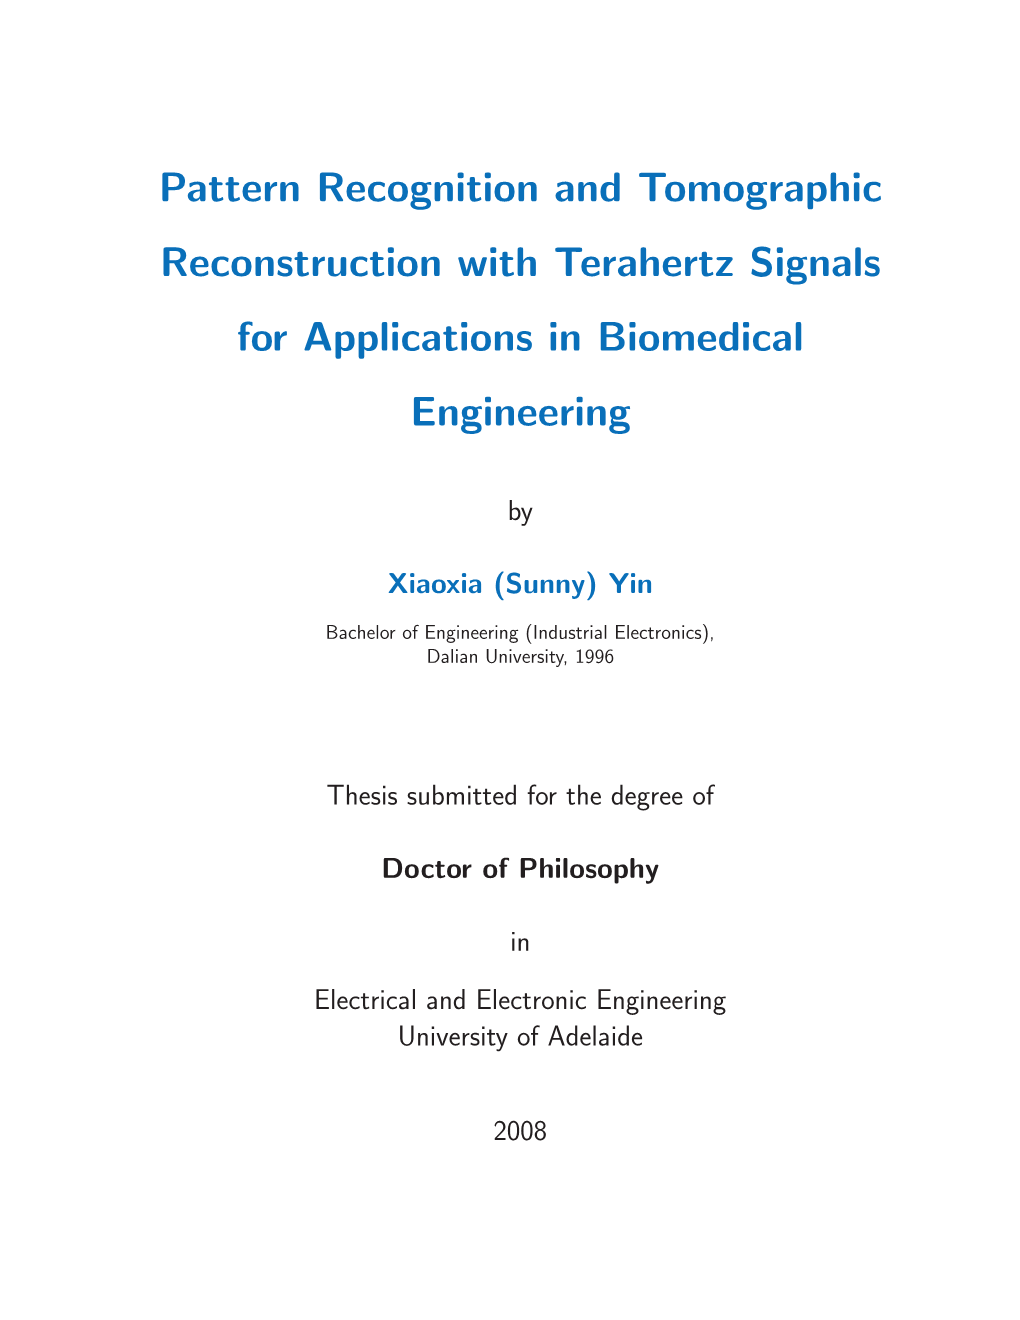 Pattern Recognition and Tomographic Reconstruction with Terahertz Signals for Applications in Biomedical Engineering